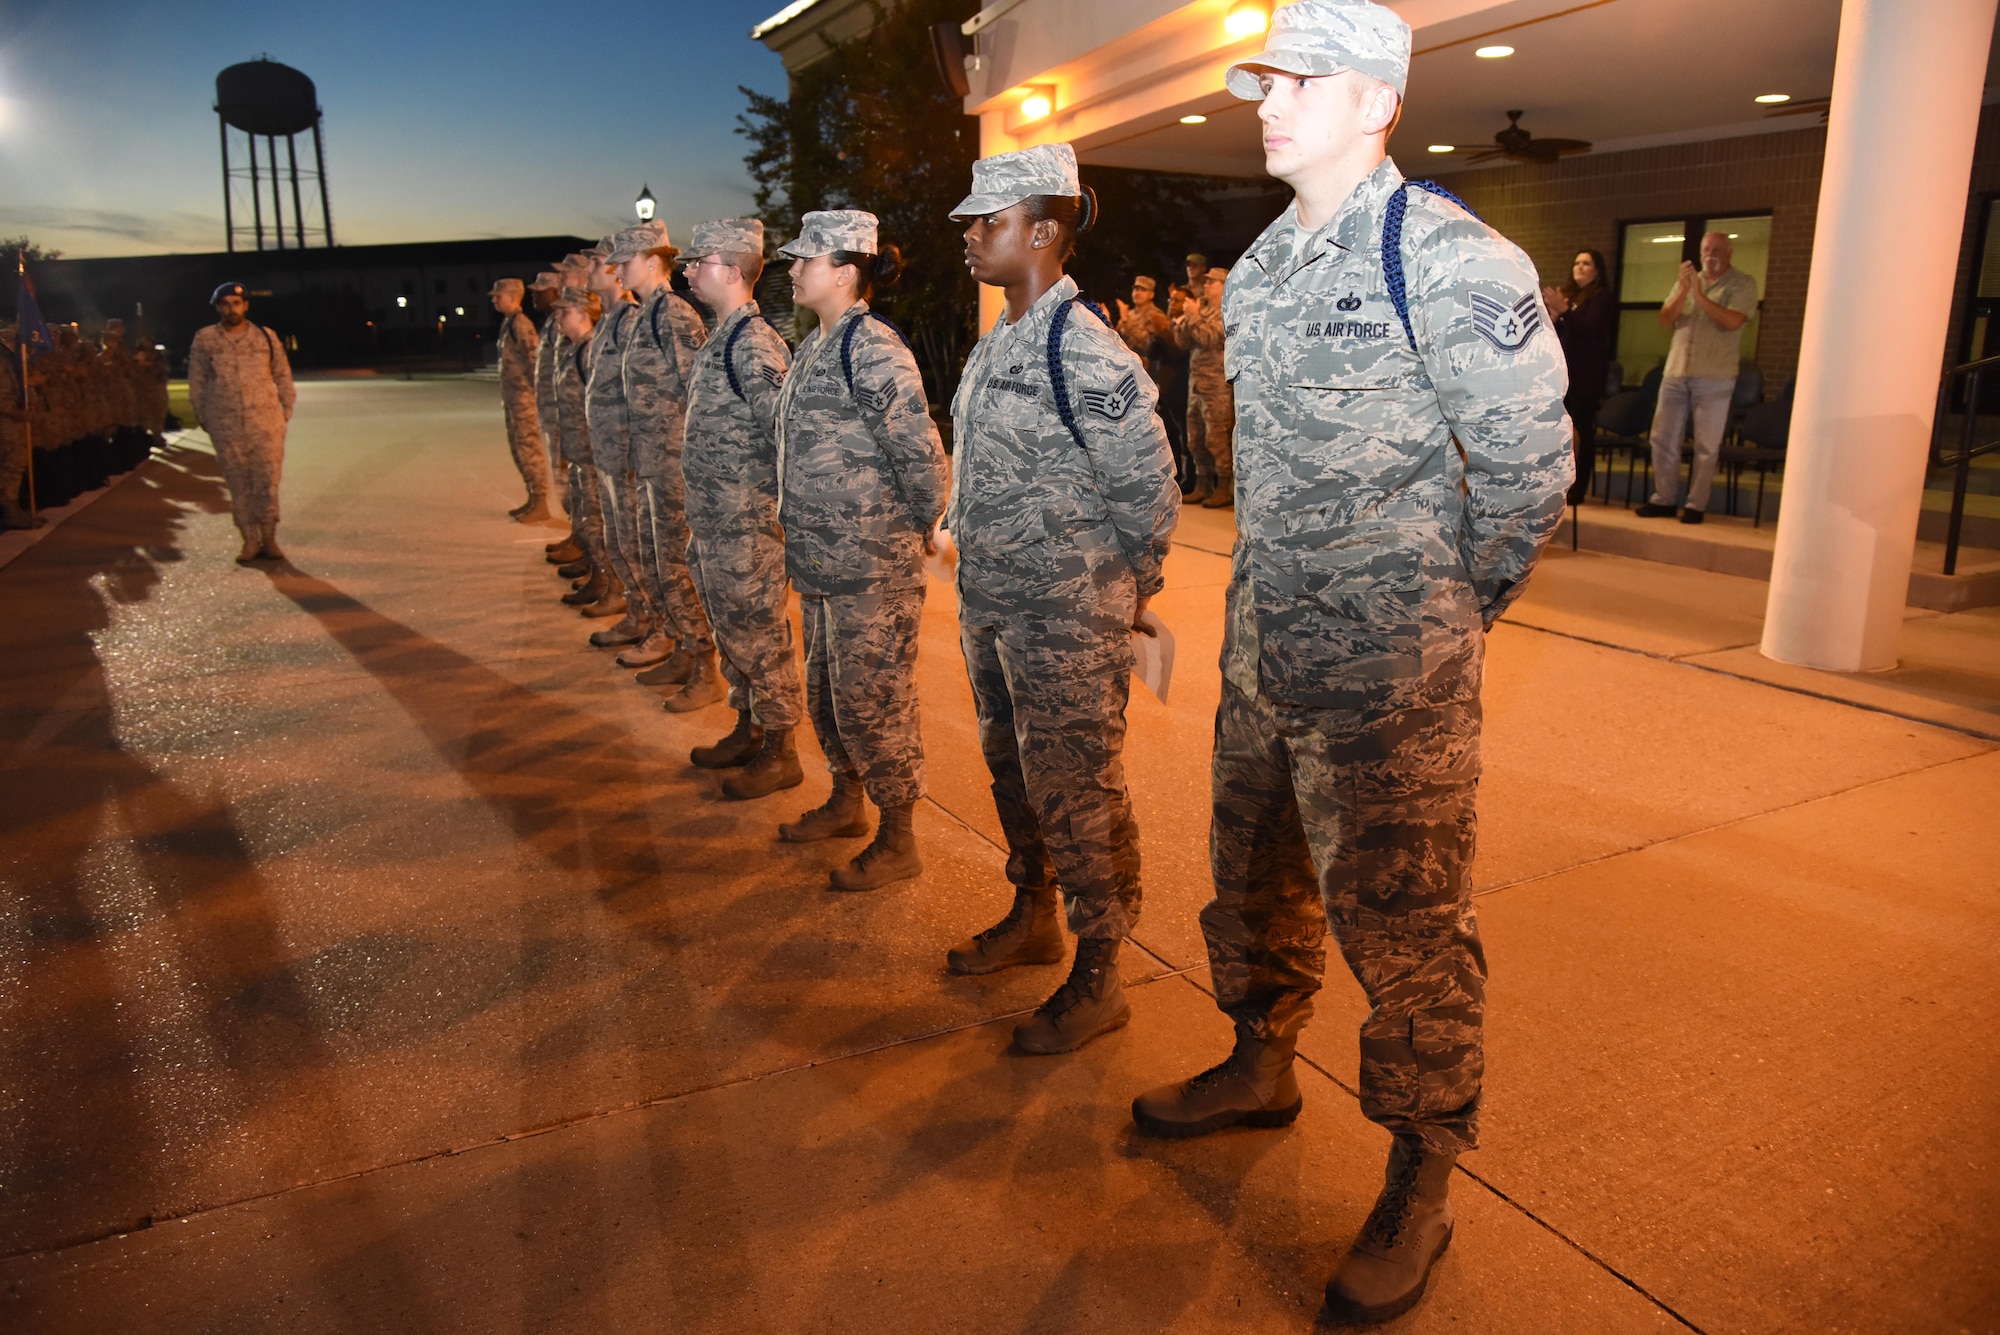 Airmen stand in formation during a Military Training Leader Course graduation ceremony at Keesler Air Force Base, Miss., Nov. 18, 2016. The graduates wear a blue aiguillette to signify their role in the Air Force as a MTL. These Airmen are the first graduates to attend a revised MTL course which includes Human Behavior and the Profession of Arms Center of Excellence training. (U.S. Air Force photo by Kemberly Groue)